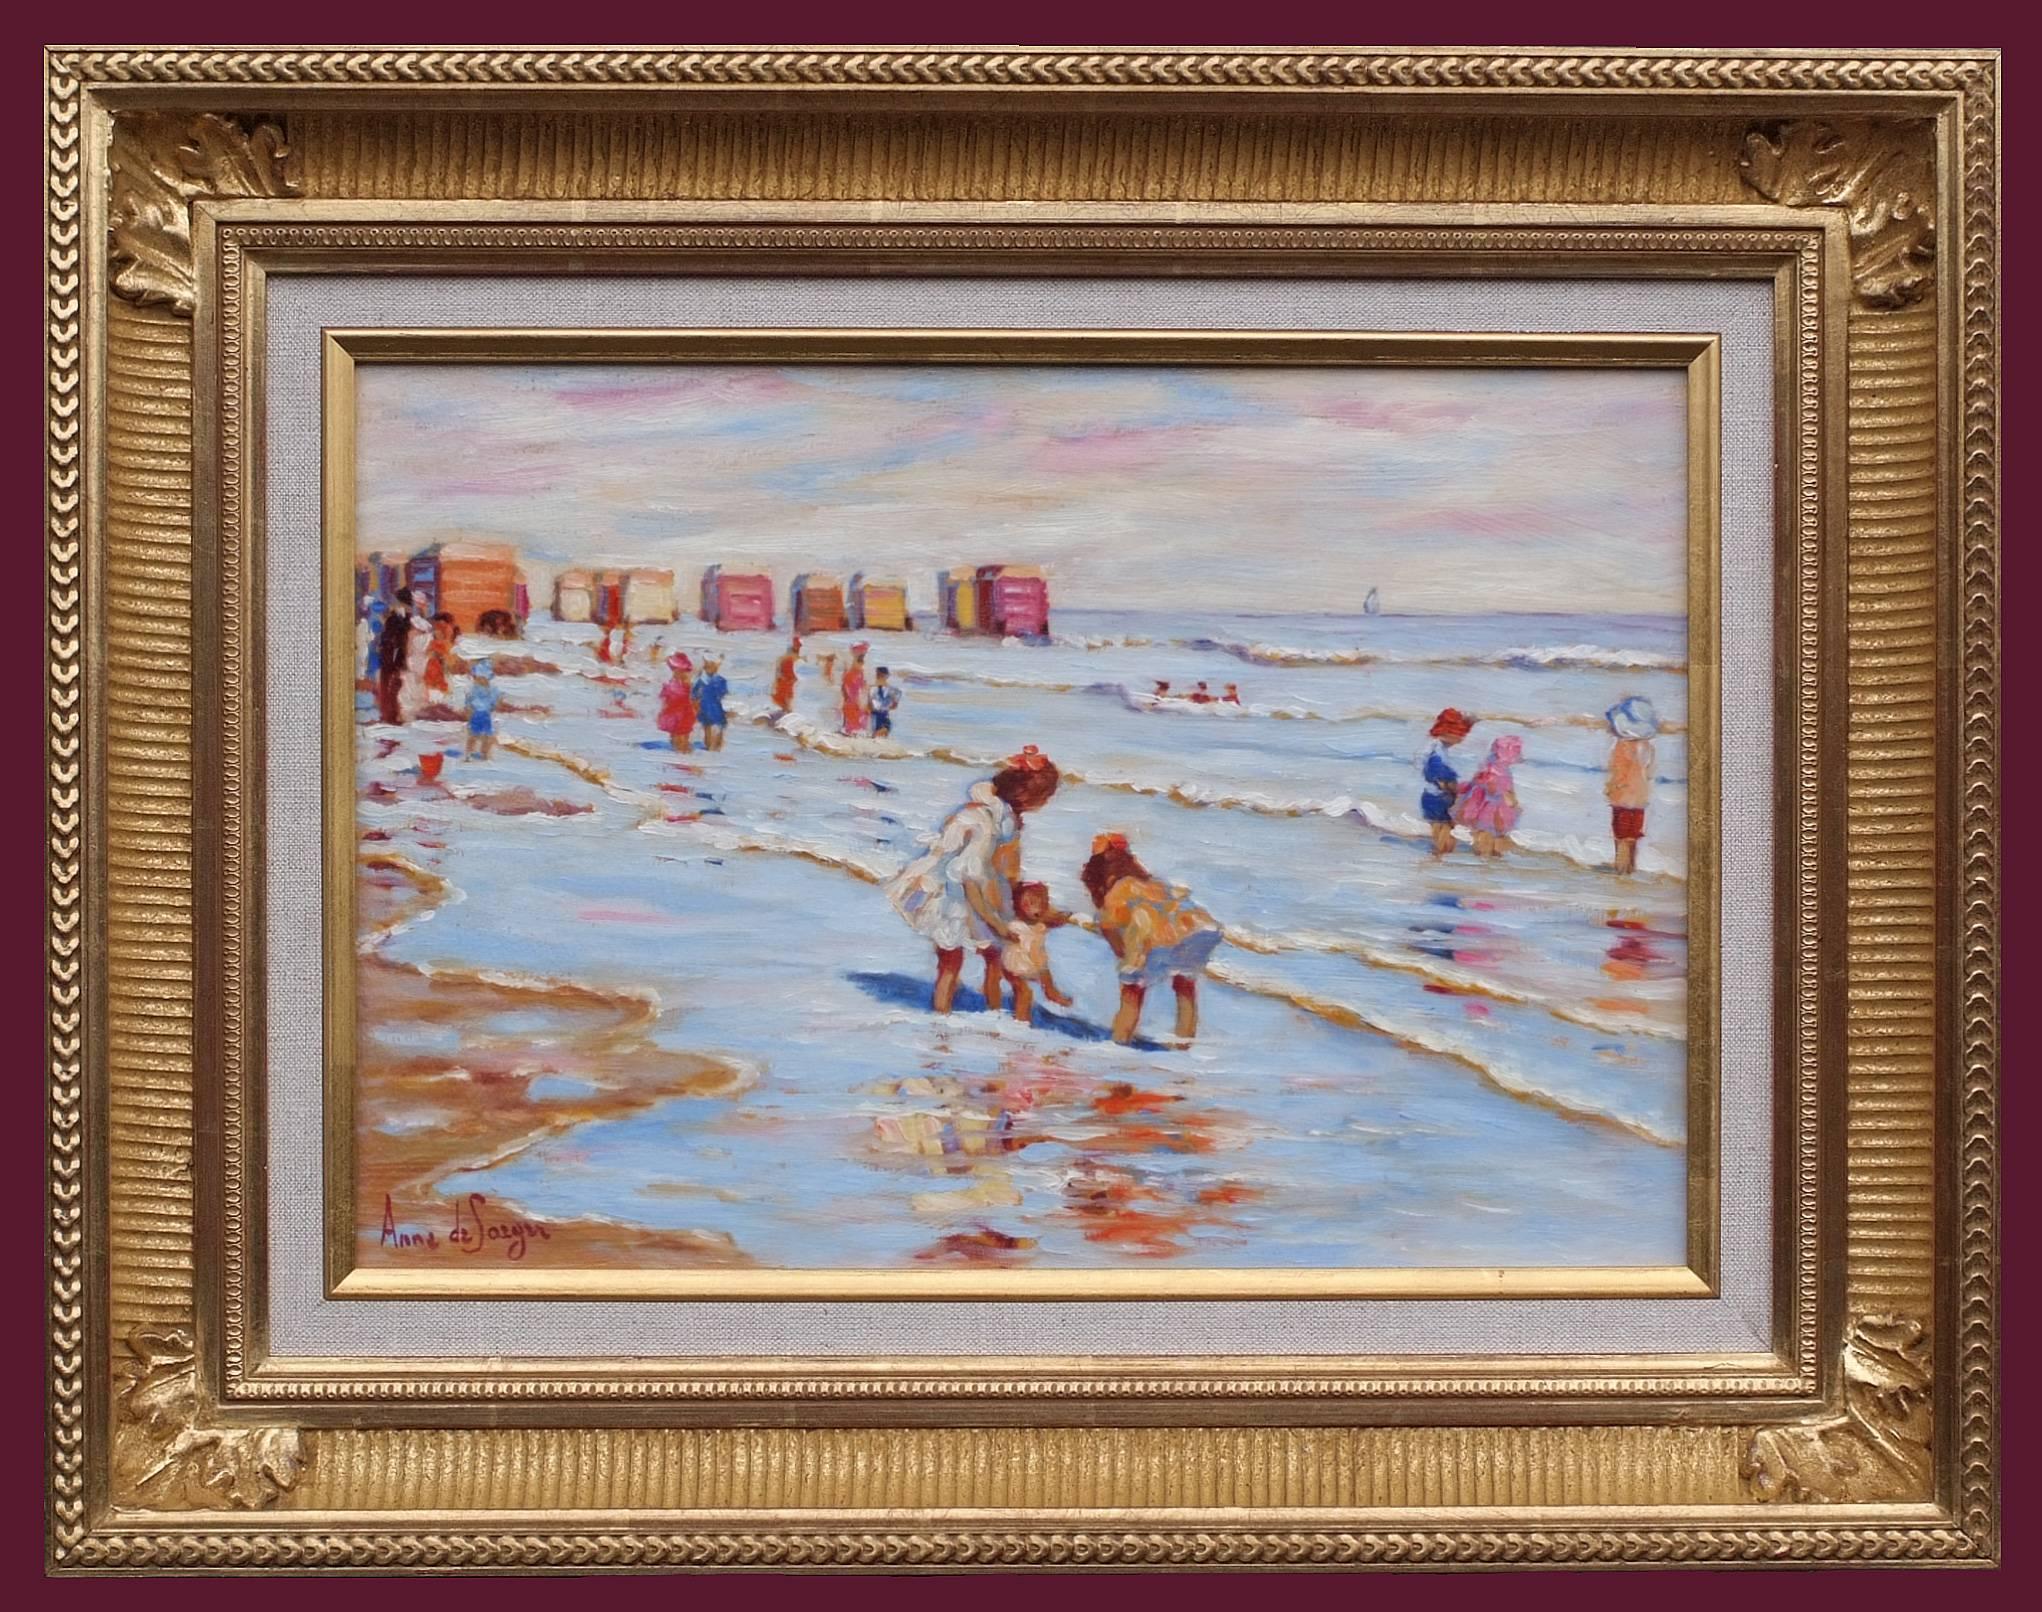 Anne de Saeger Portrait Painting - Painting 20th Century Sea Bathing 1900 French Normandy Beach and Children